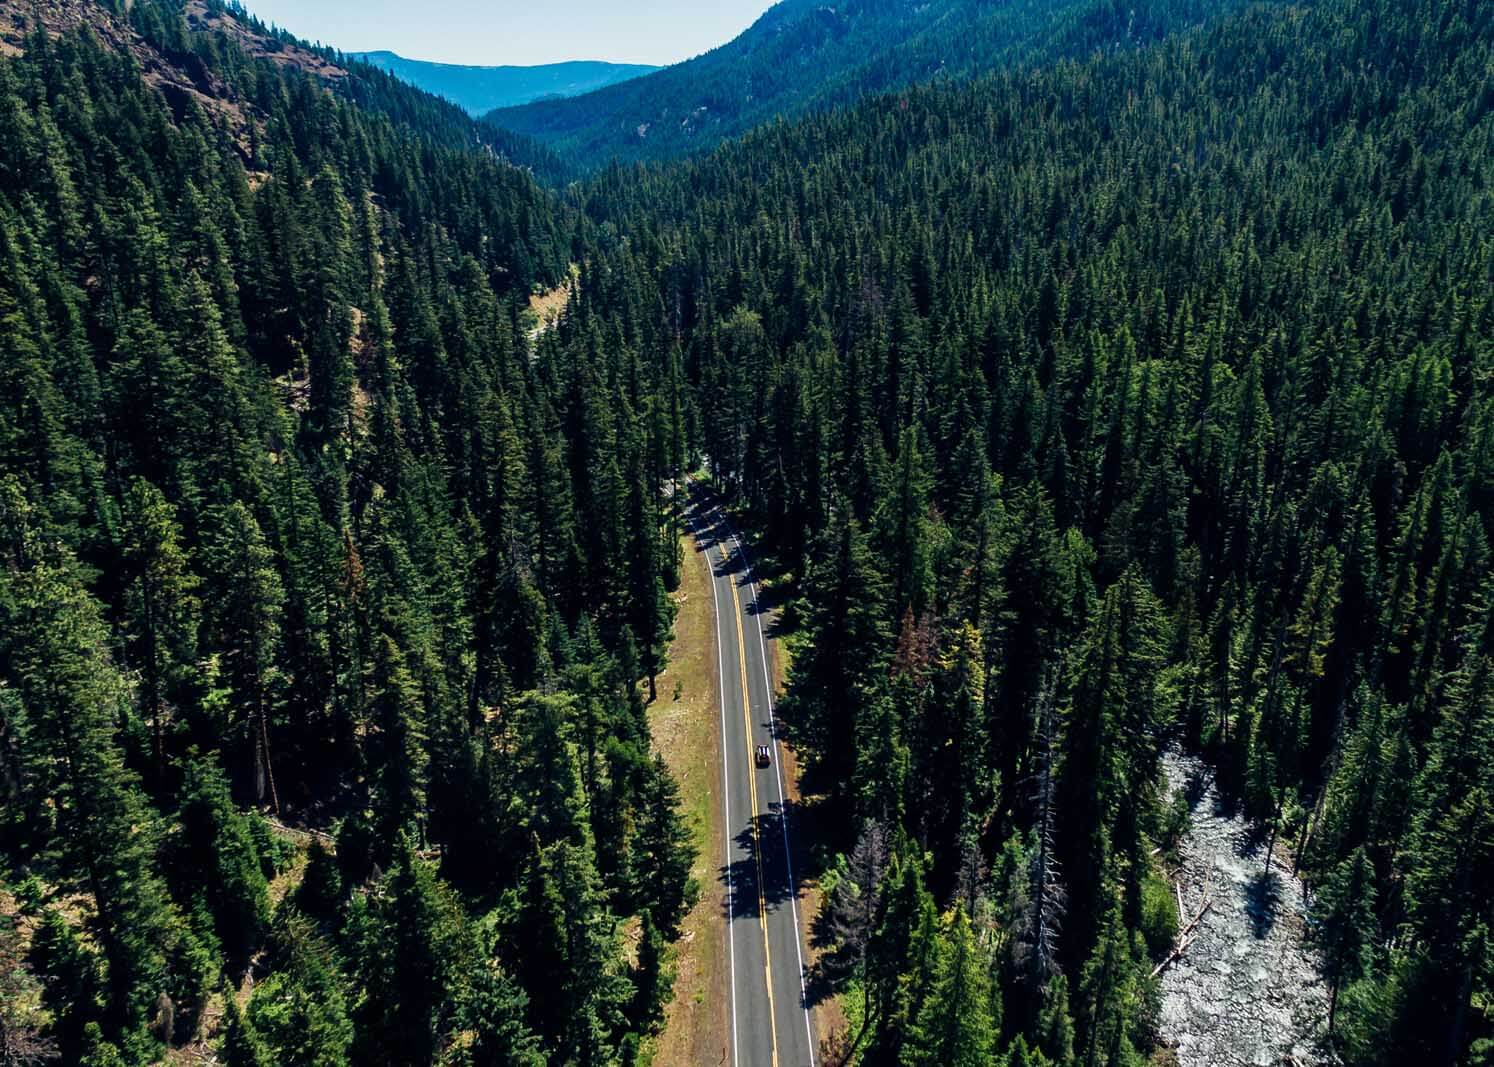 View of driving through Naches by drone